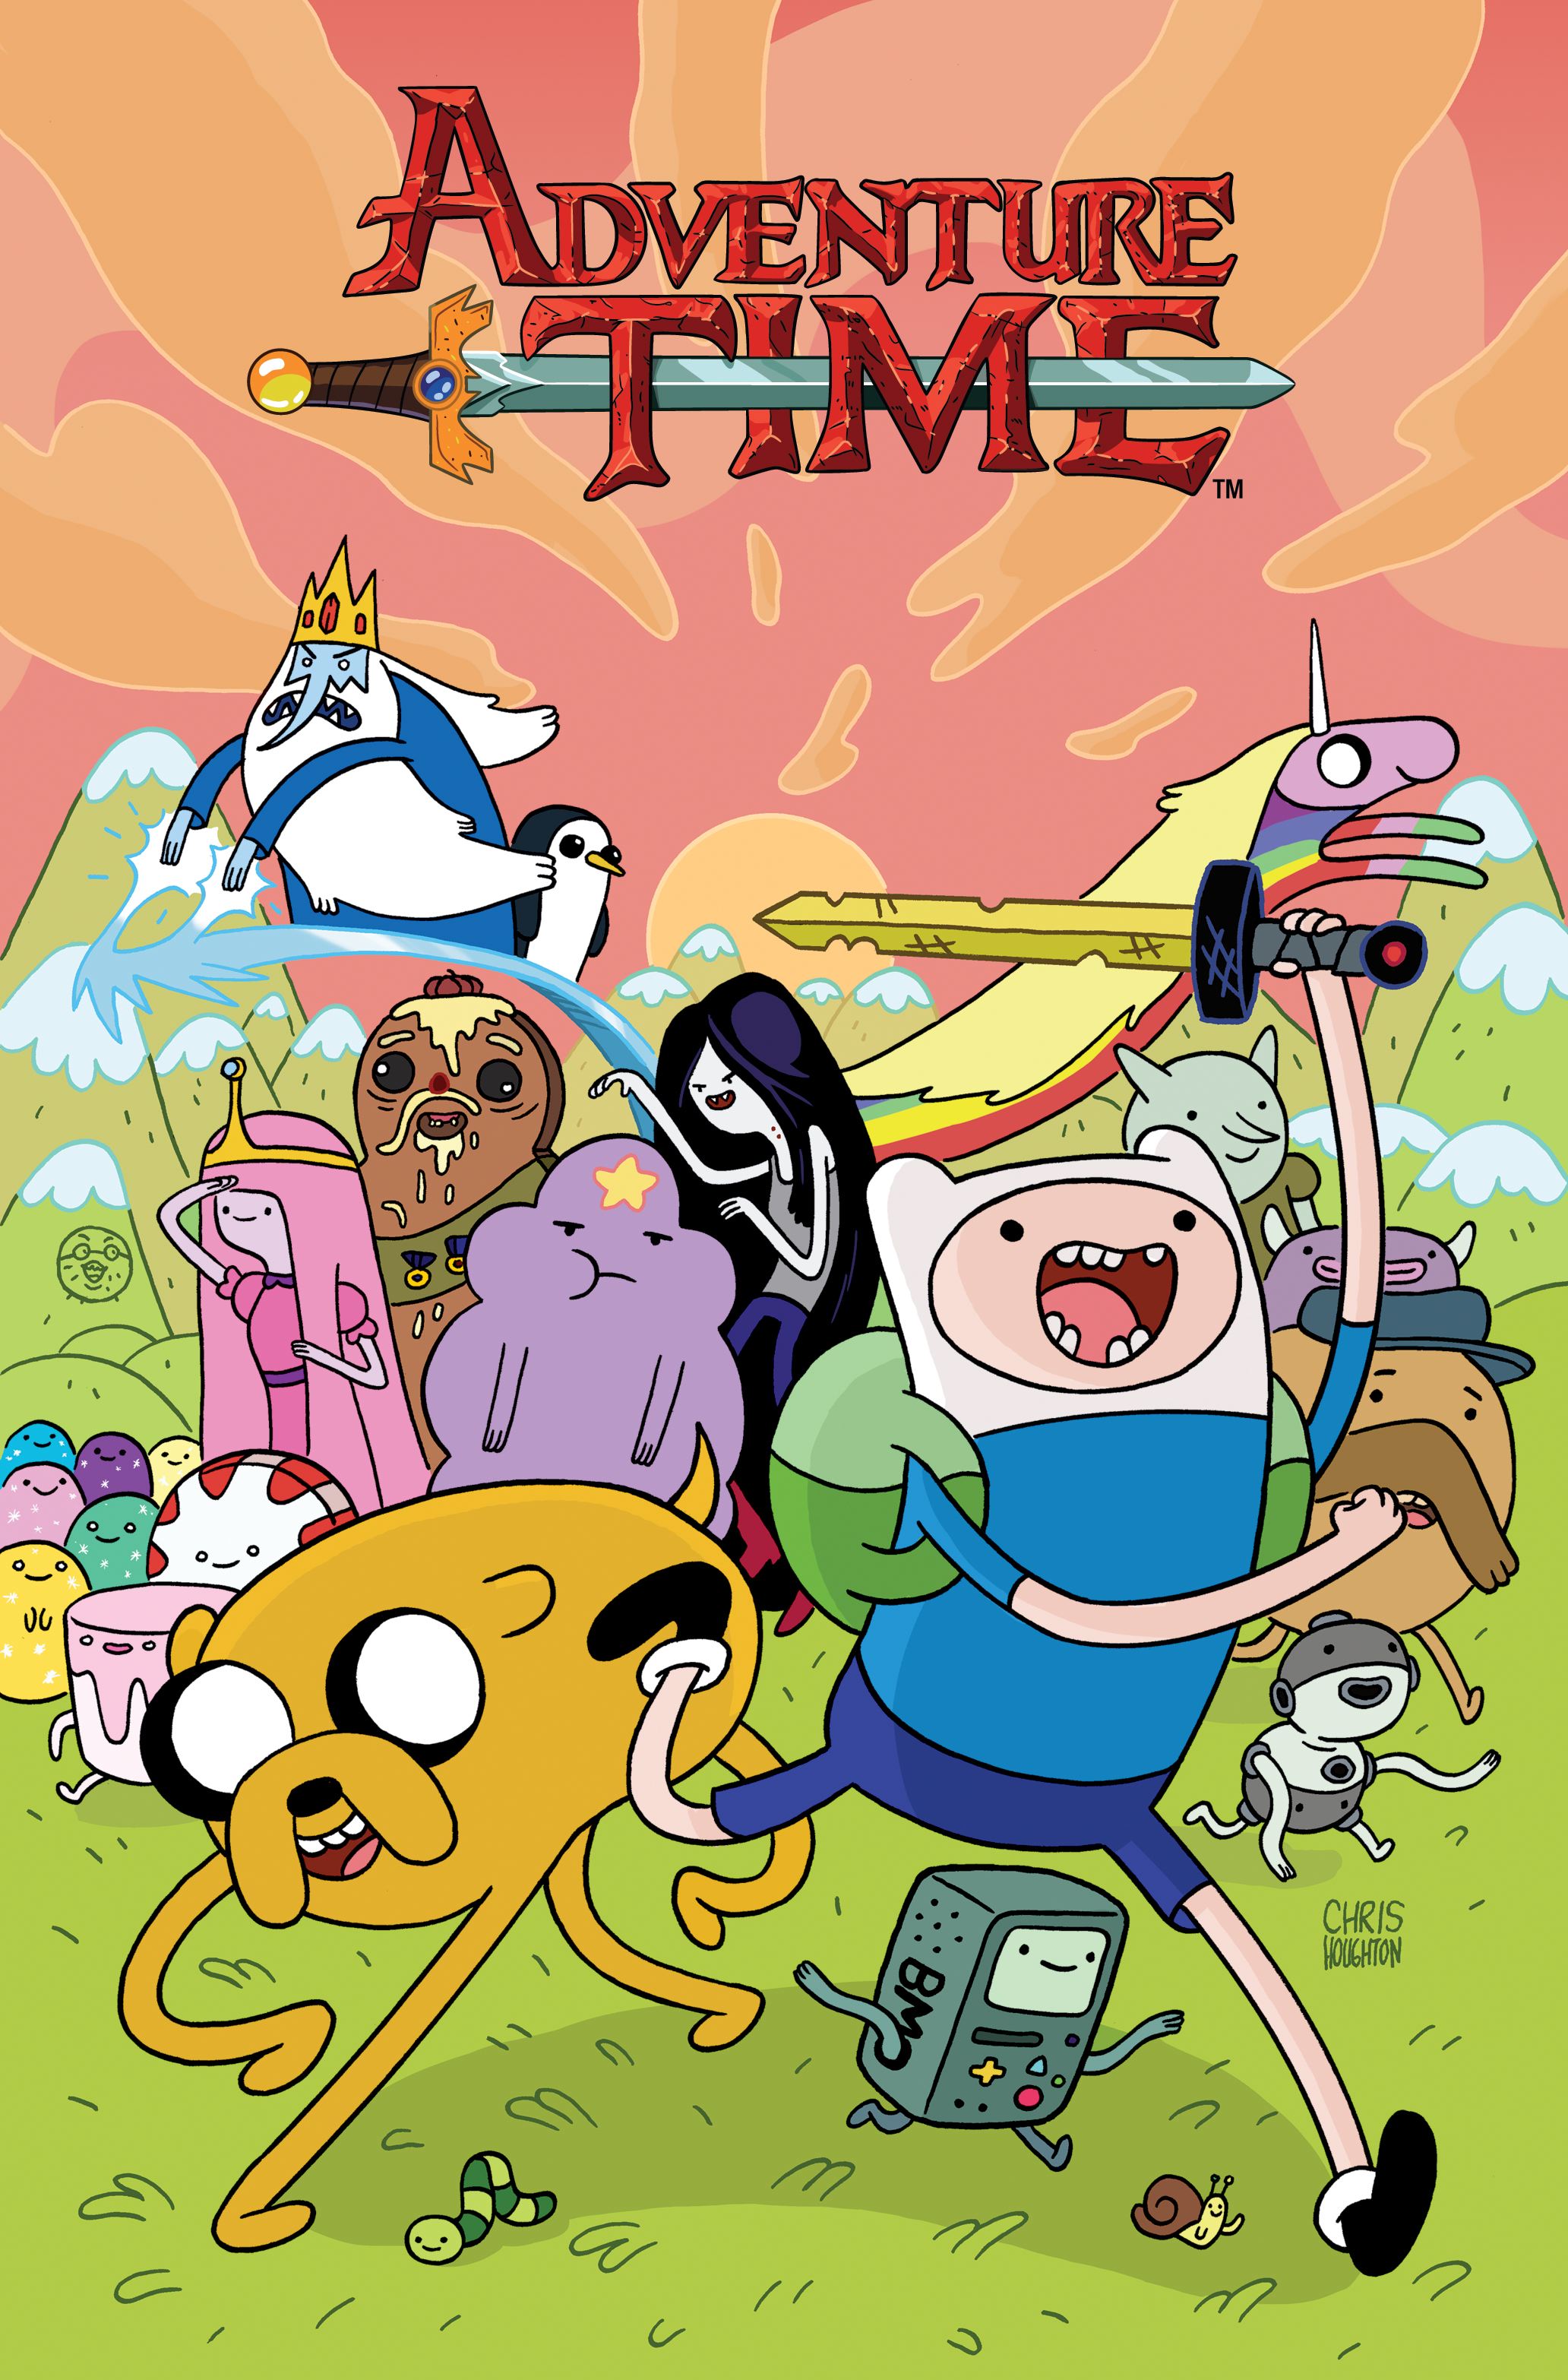 Adventure Time - Adventure Time Vol 2 , HD Wallpaper & Backgrounds